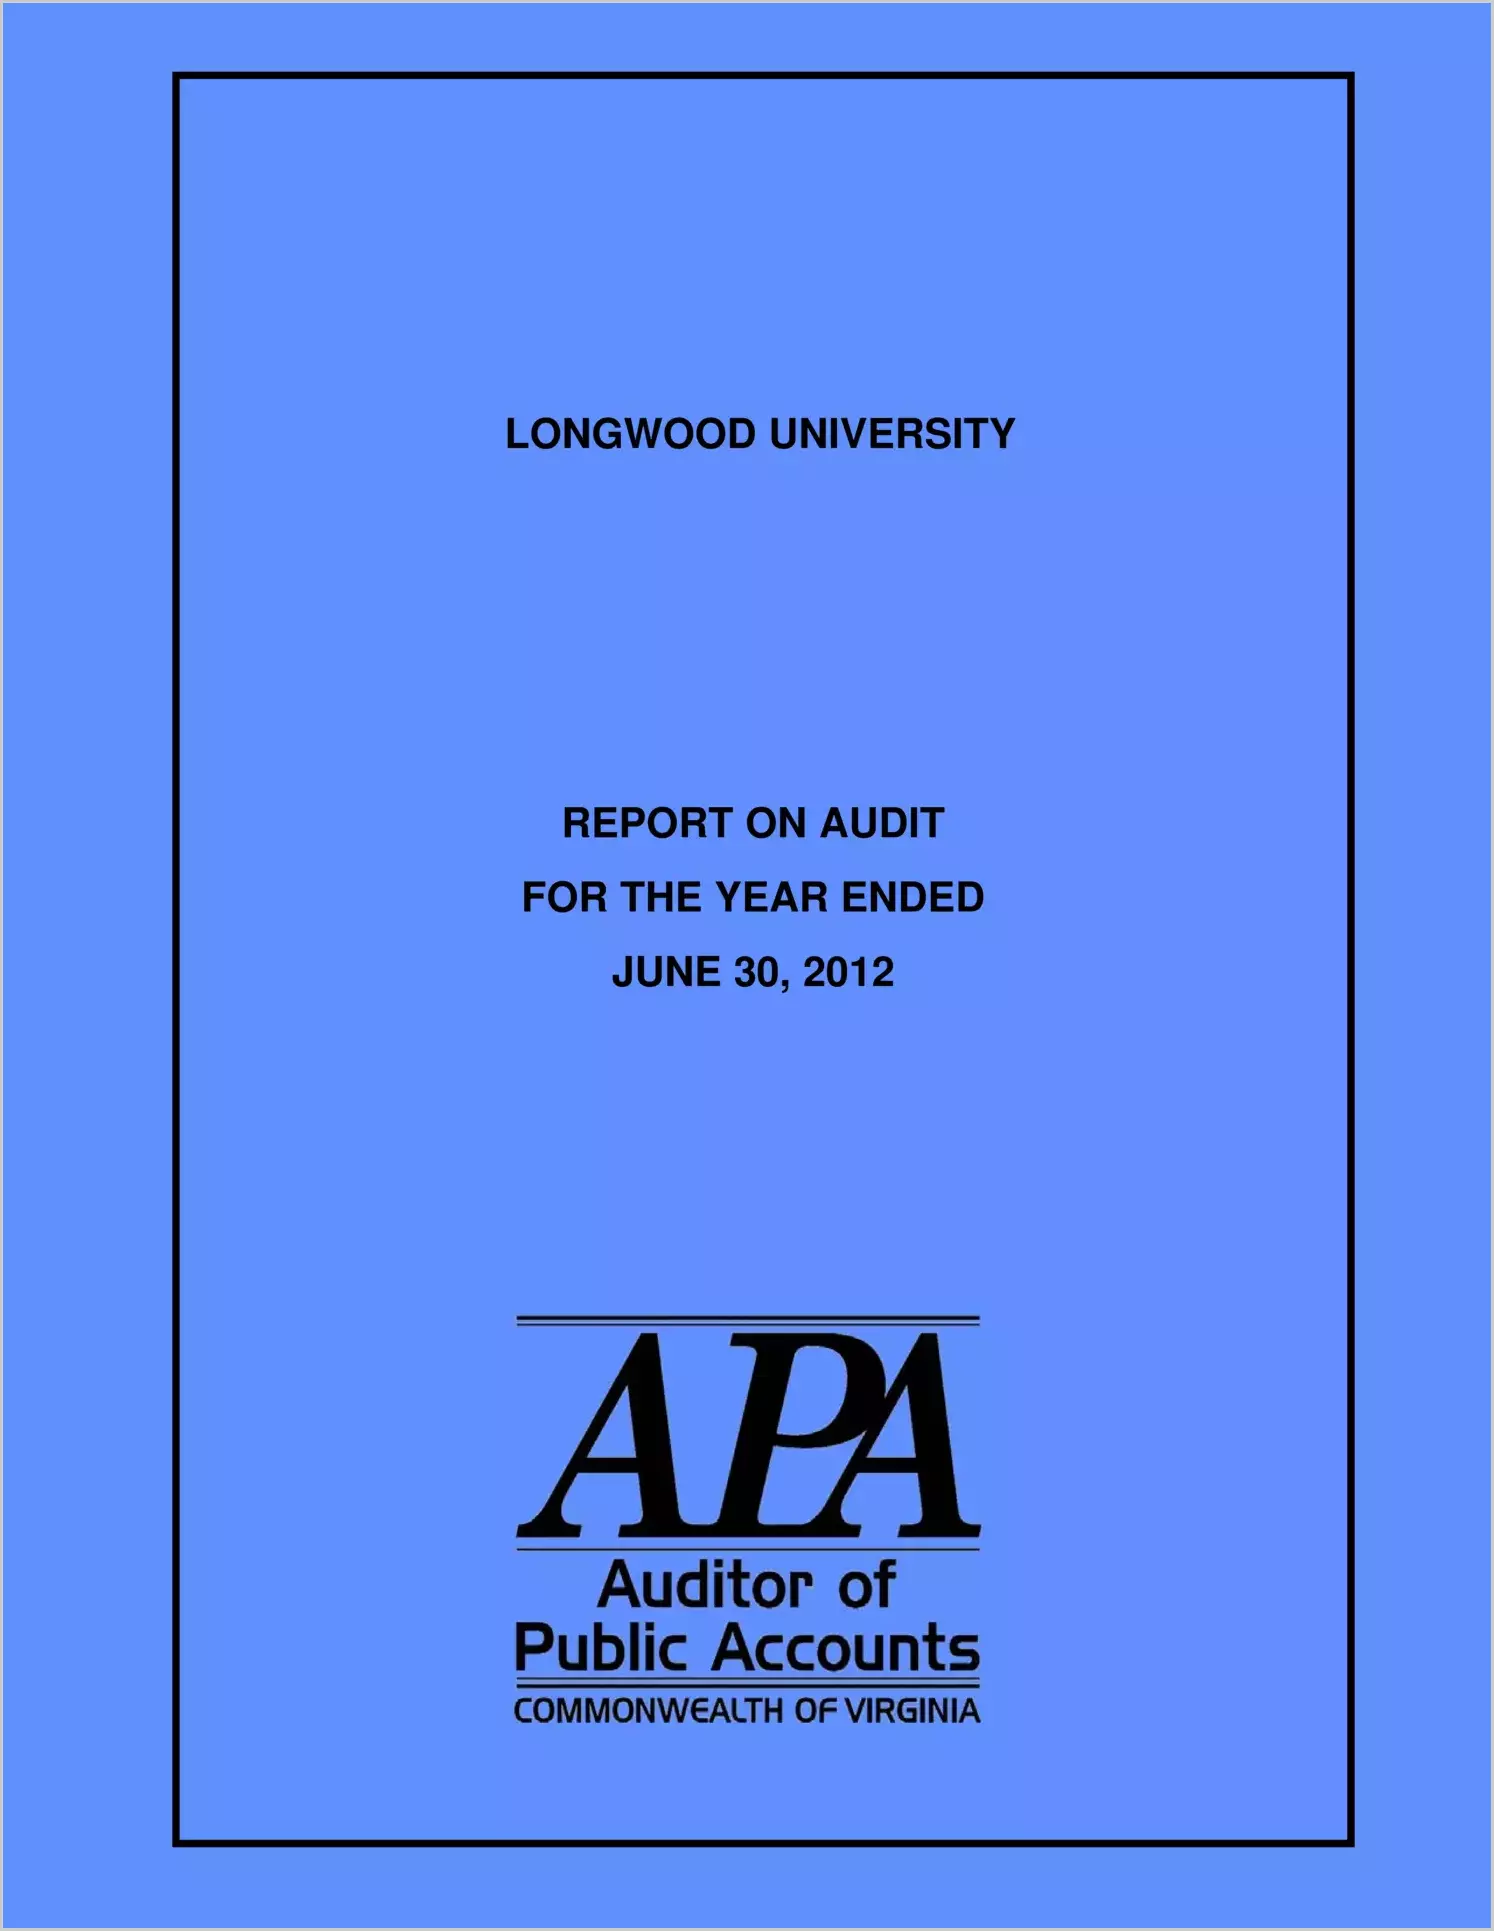 Longwood University report on audit for the year ended June 30, 2012